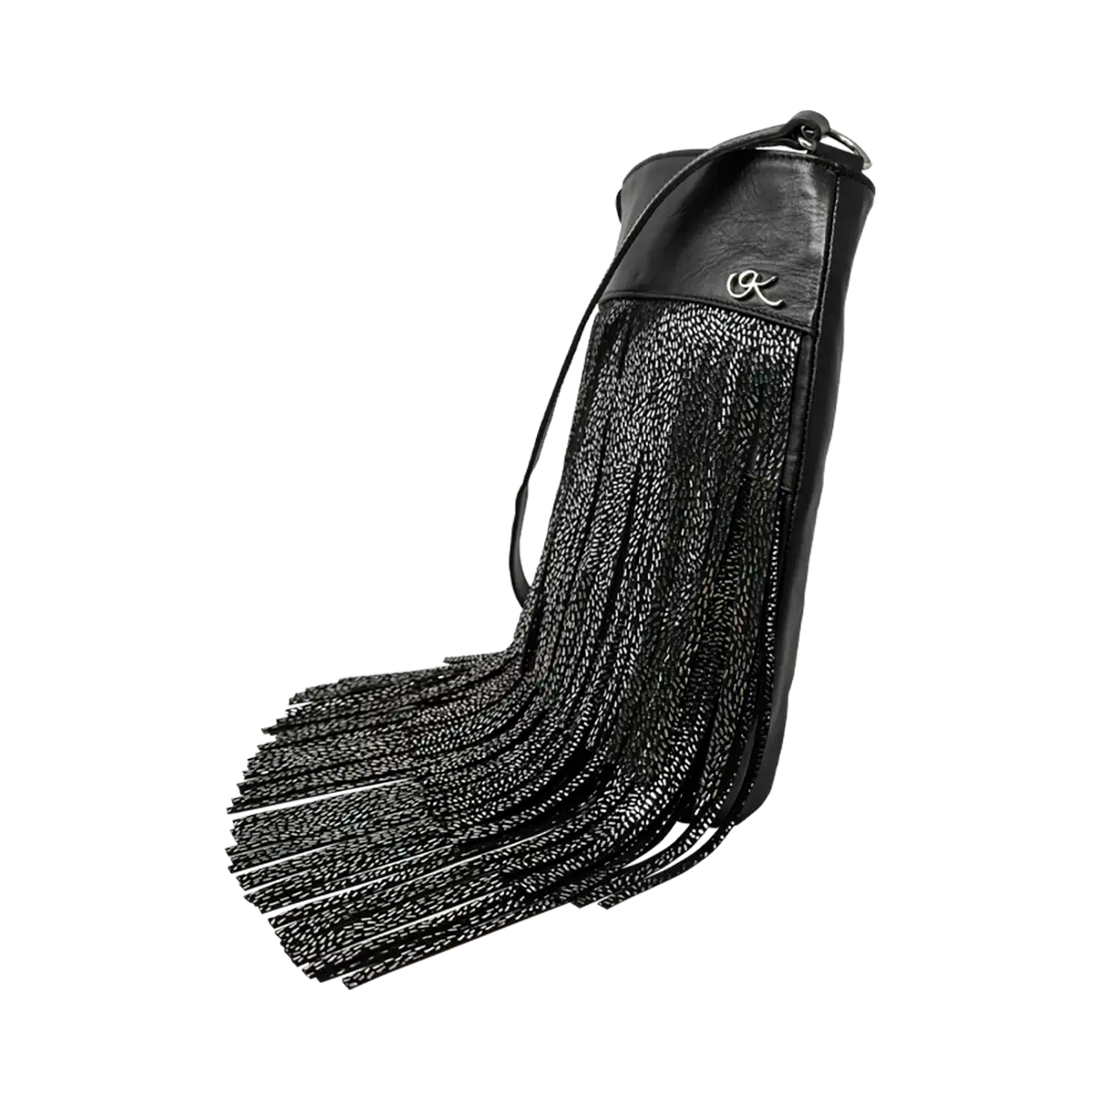 black silver stripe leather shoulder bag with 3 layers of fringe. Fashion accessories, for women in San Diego, CA.